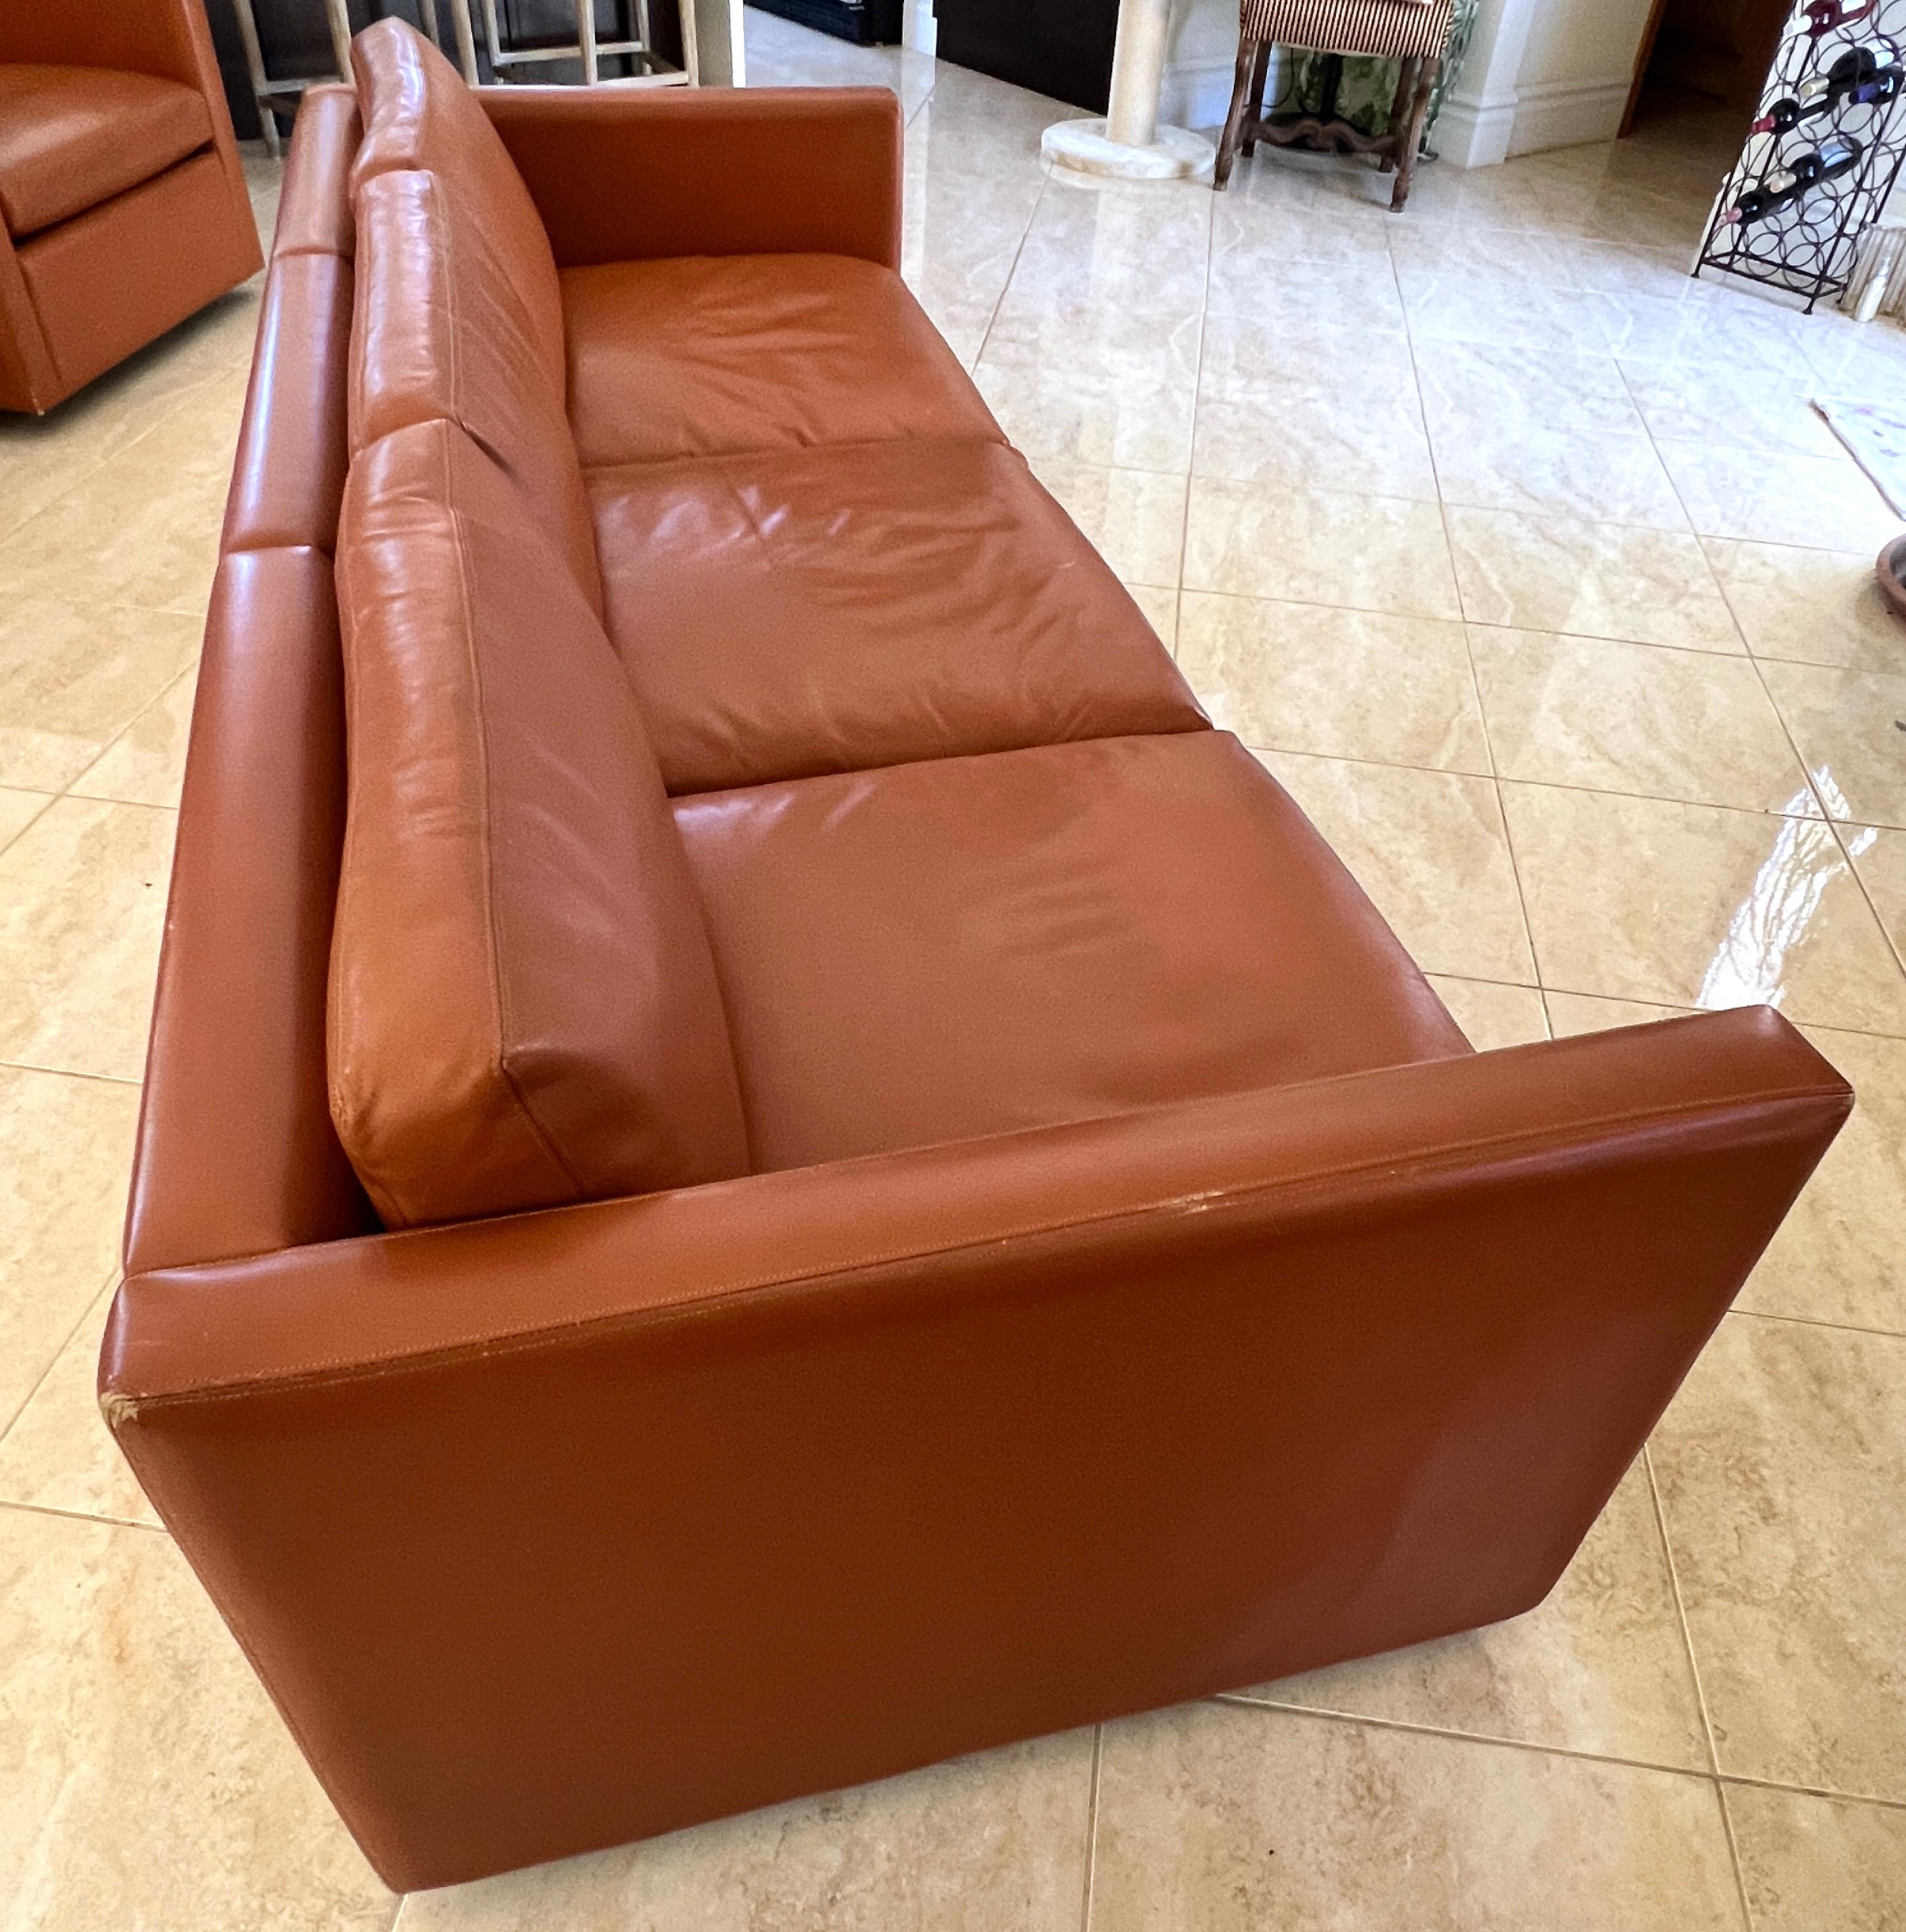 Mid-Century Modern Knoll Sofa by Charles Pfister 1971 Original Sabrina Leather, #2 '2 Available' For Sale